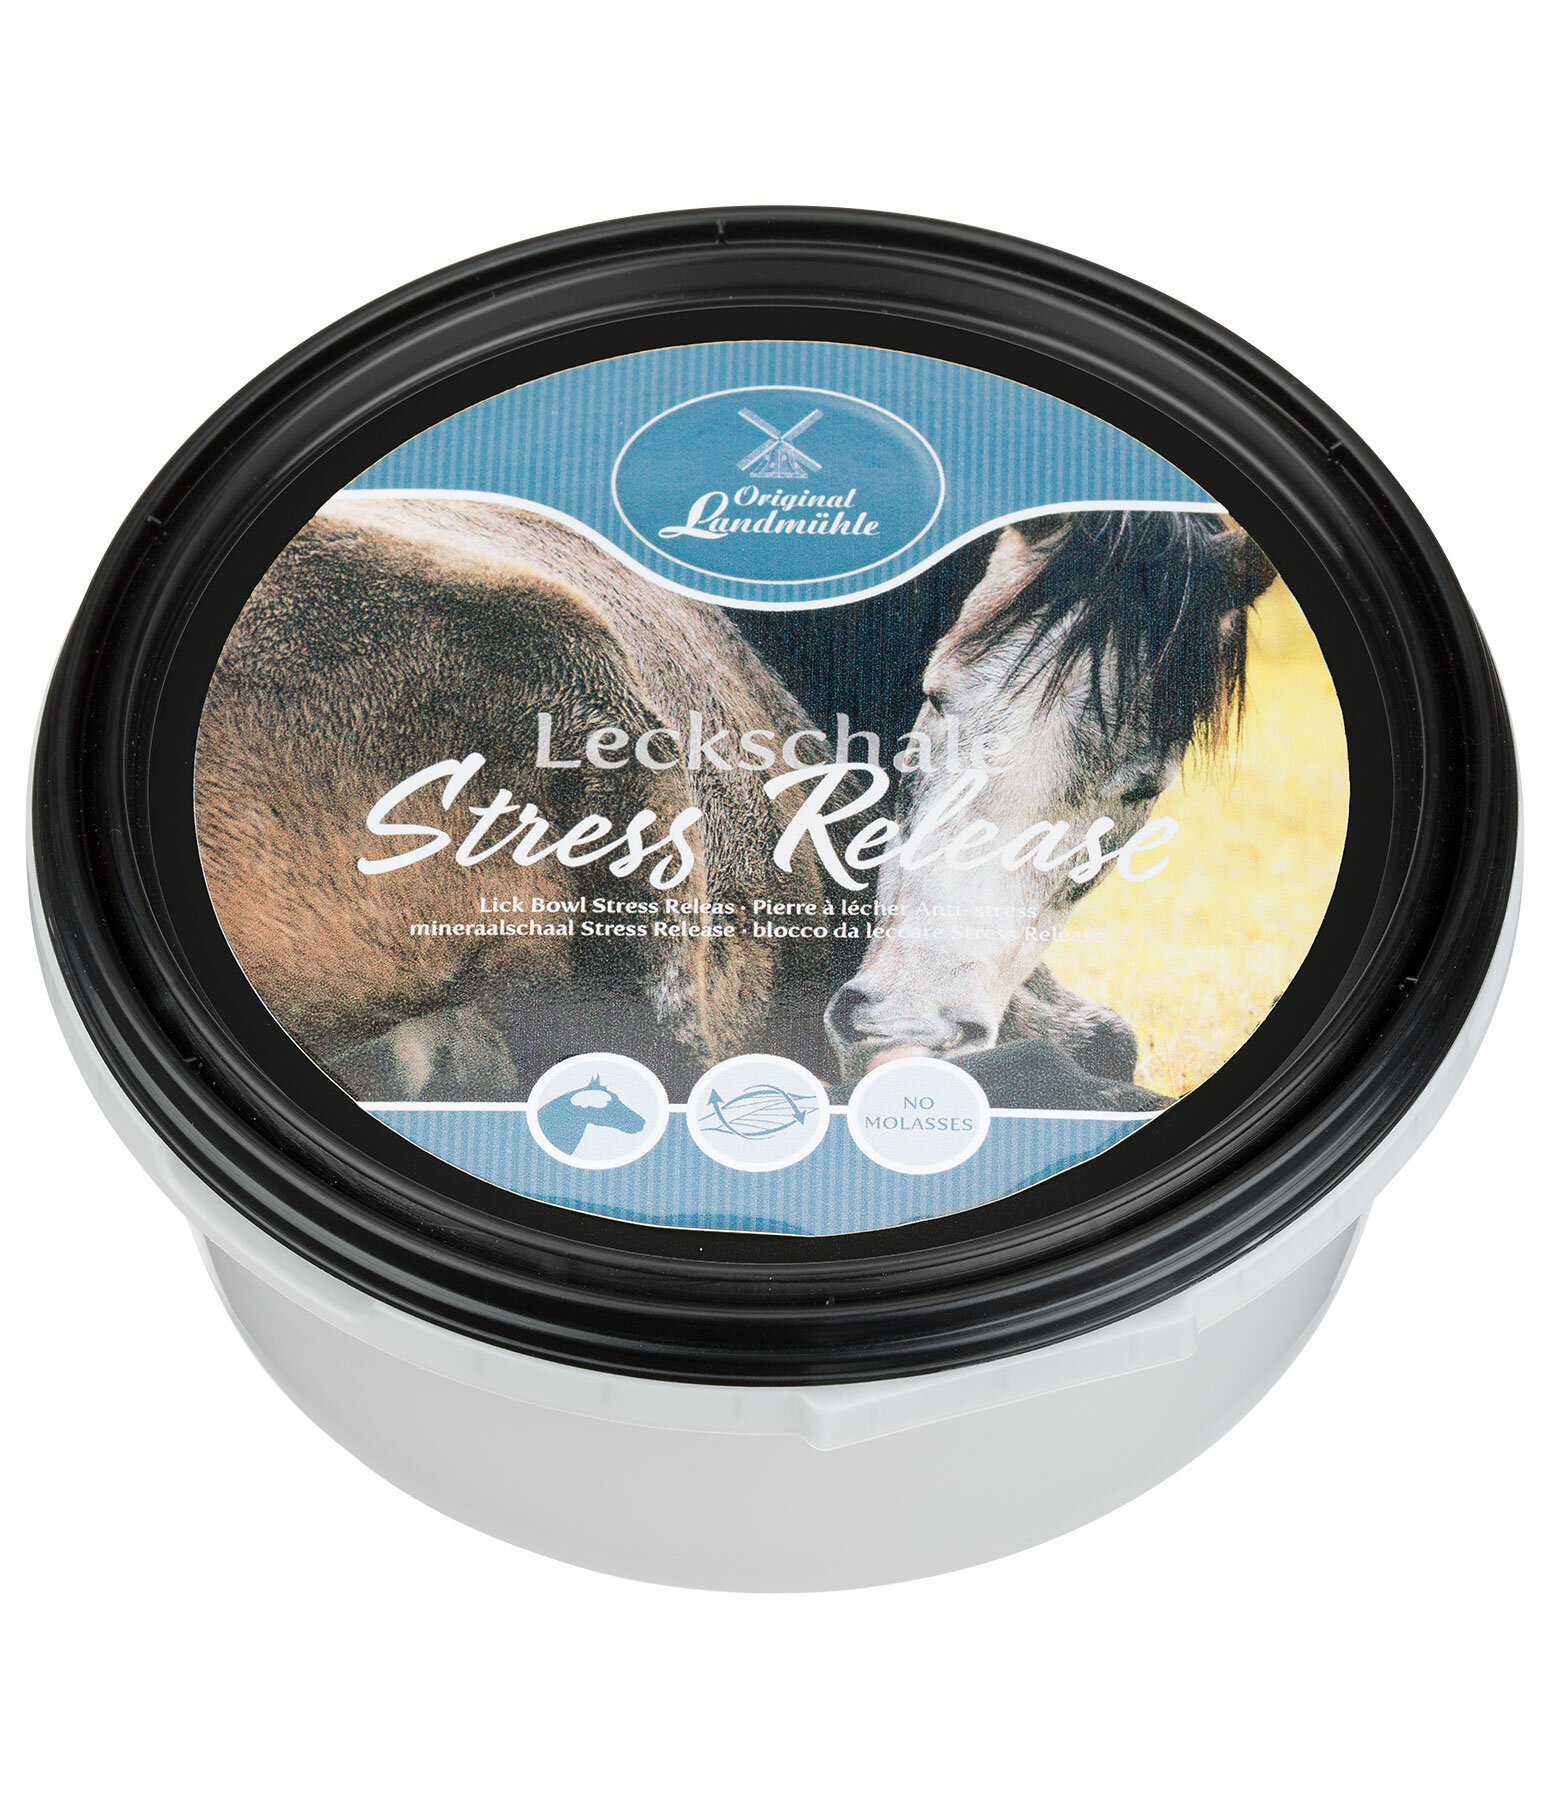 Lick Bowl Stress Release